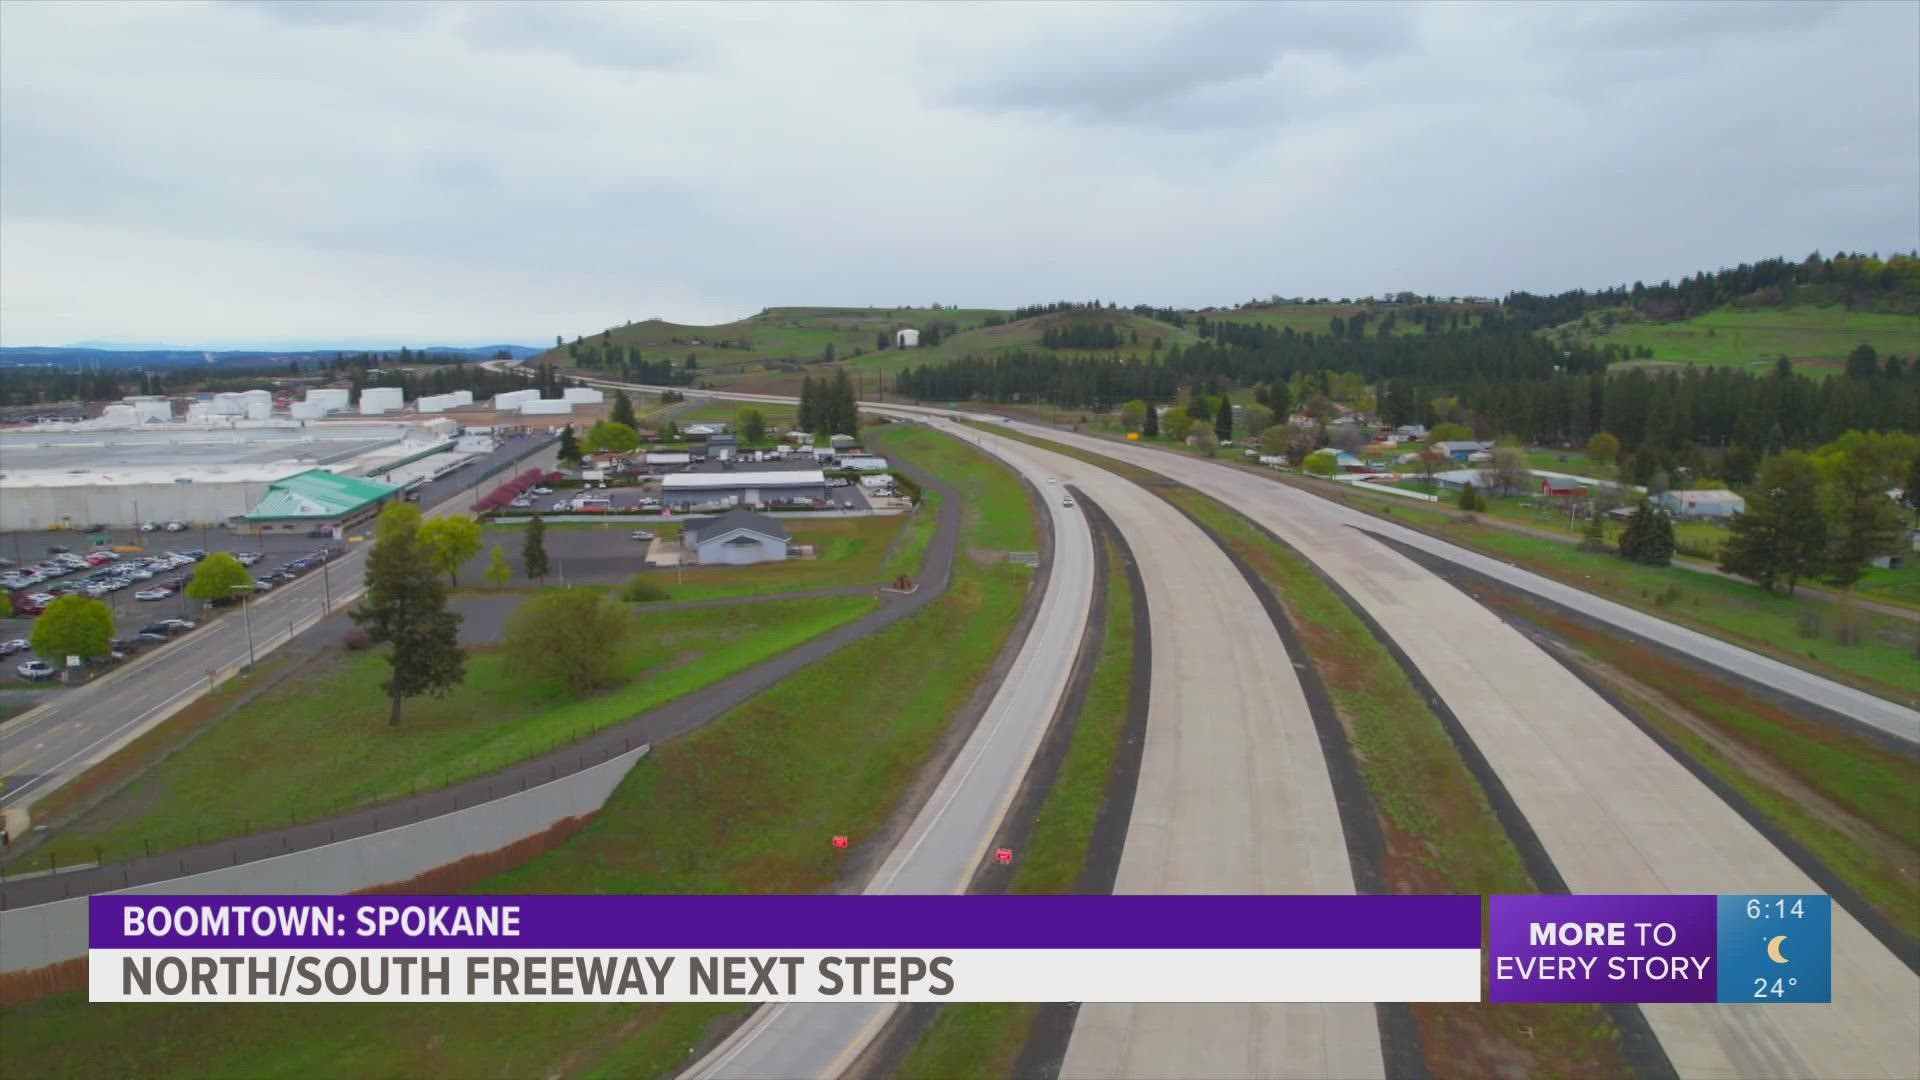 The Governor spoke about how he will work with state legislatures to ensure the freeway isn't delayed any further.